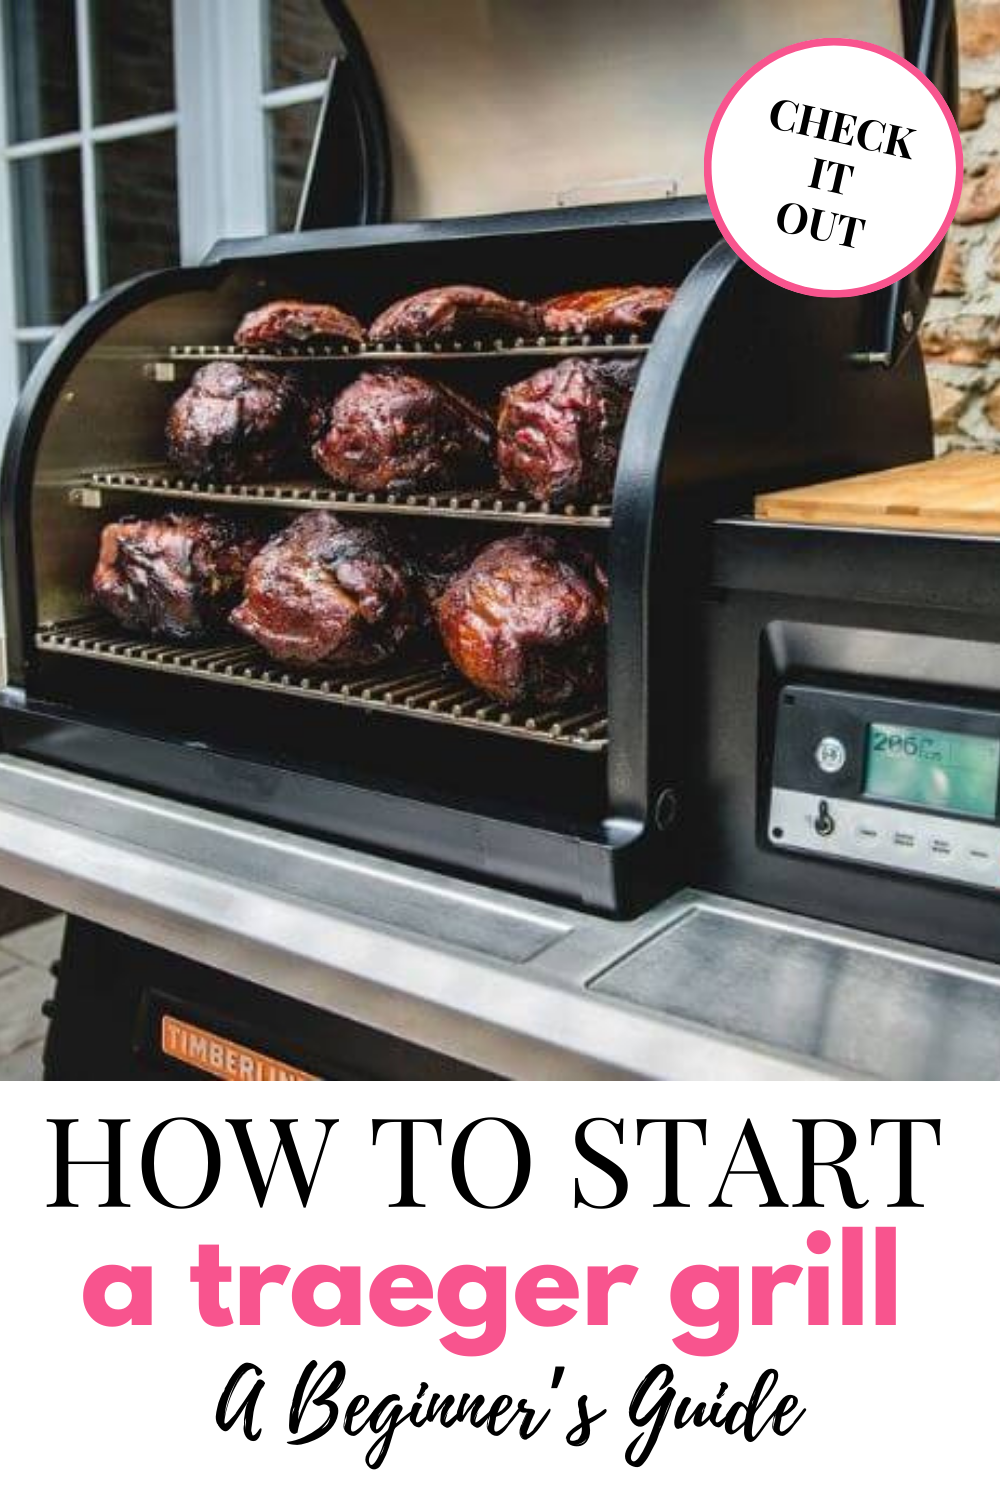 How to Start a Traeger Grill Like a Pro